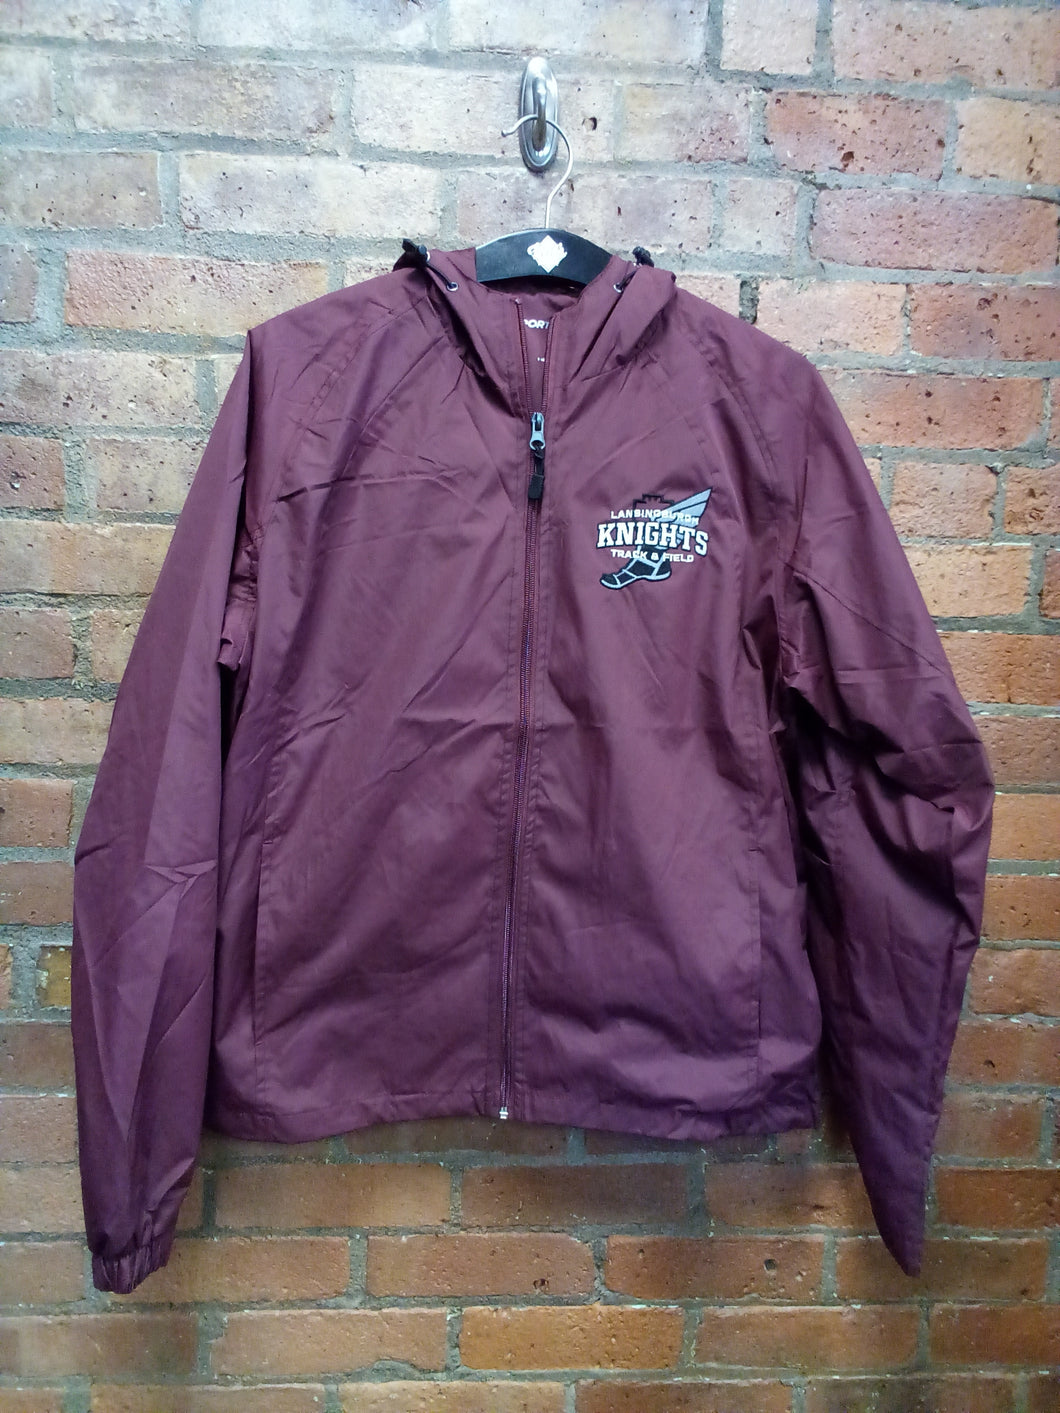 CLEARANCE - Lansingburgh Knights Track & Field Hooded Jacket - Size Small